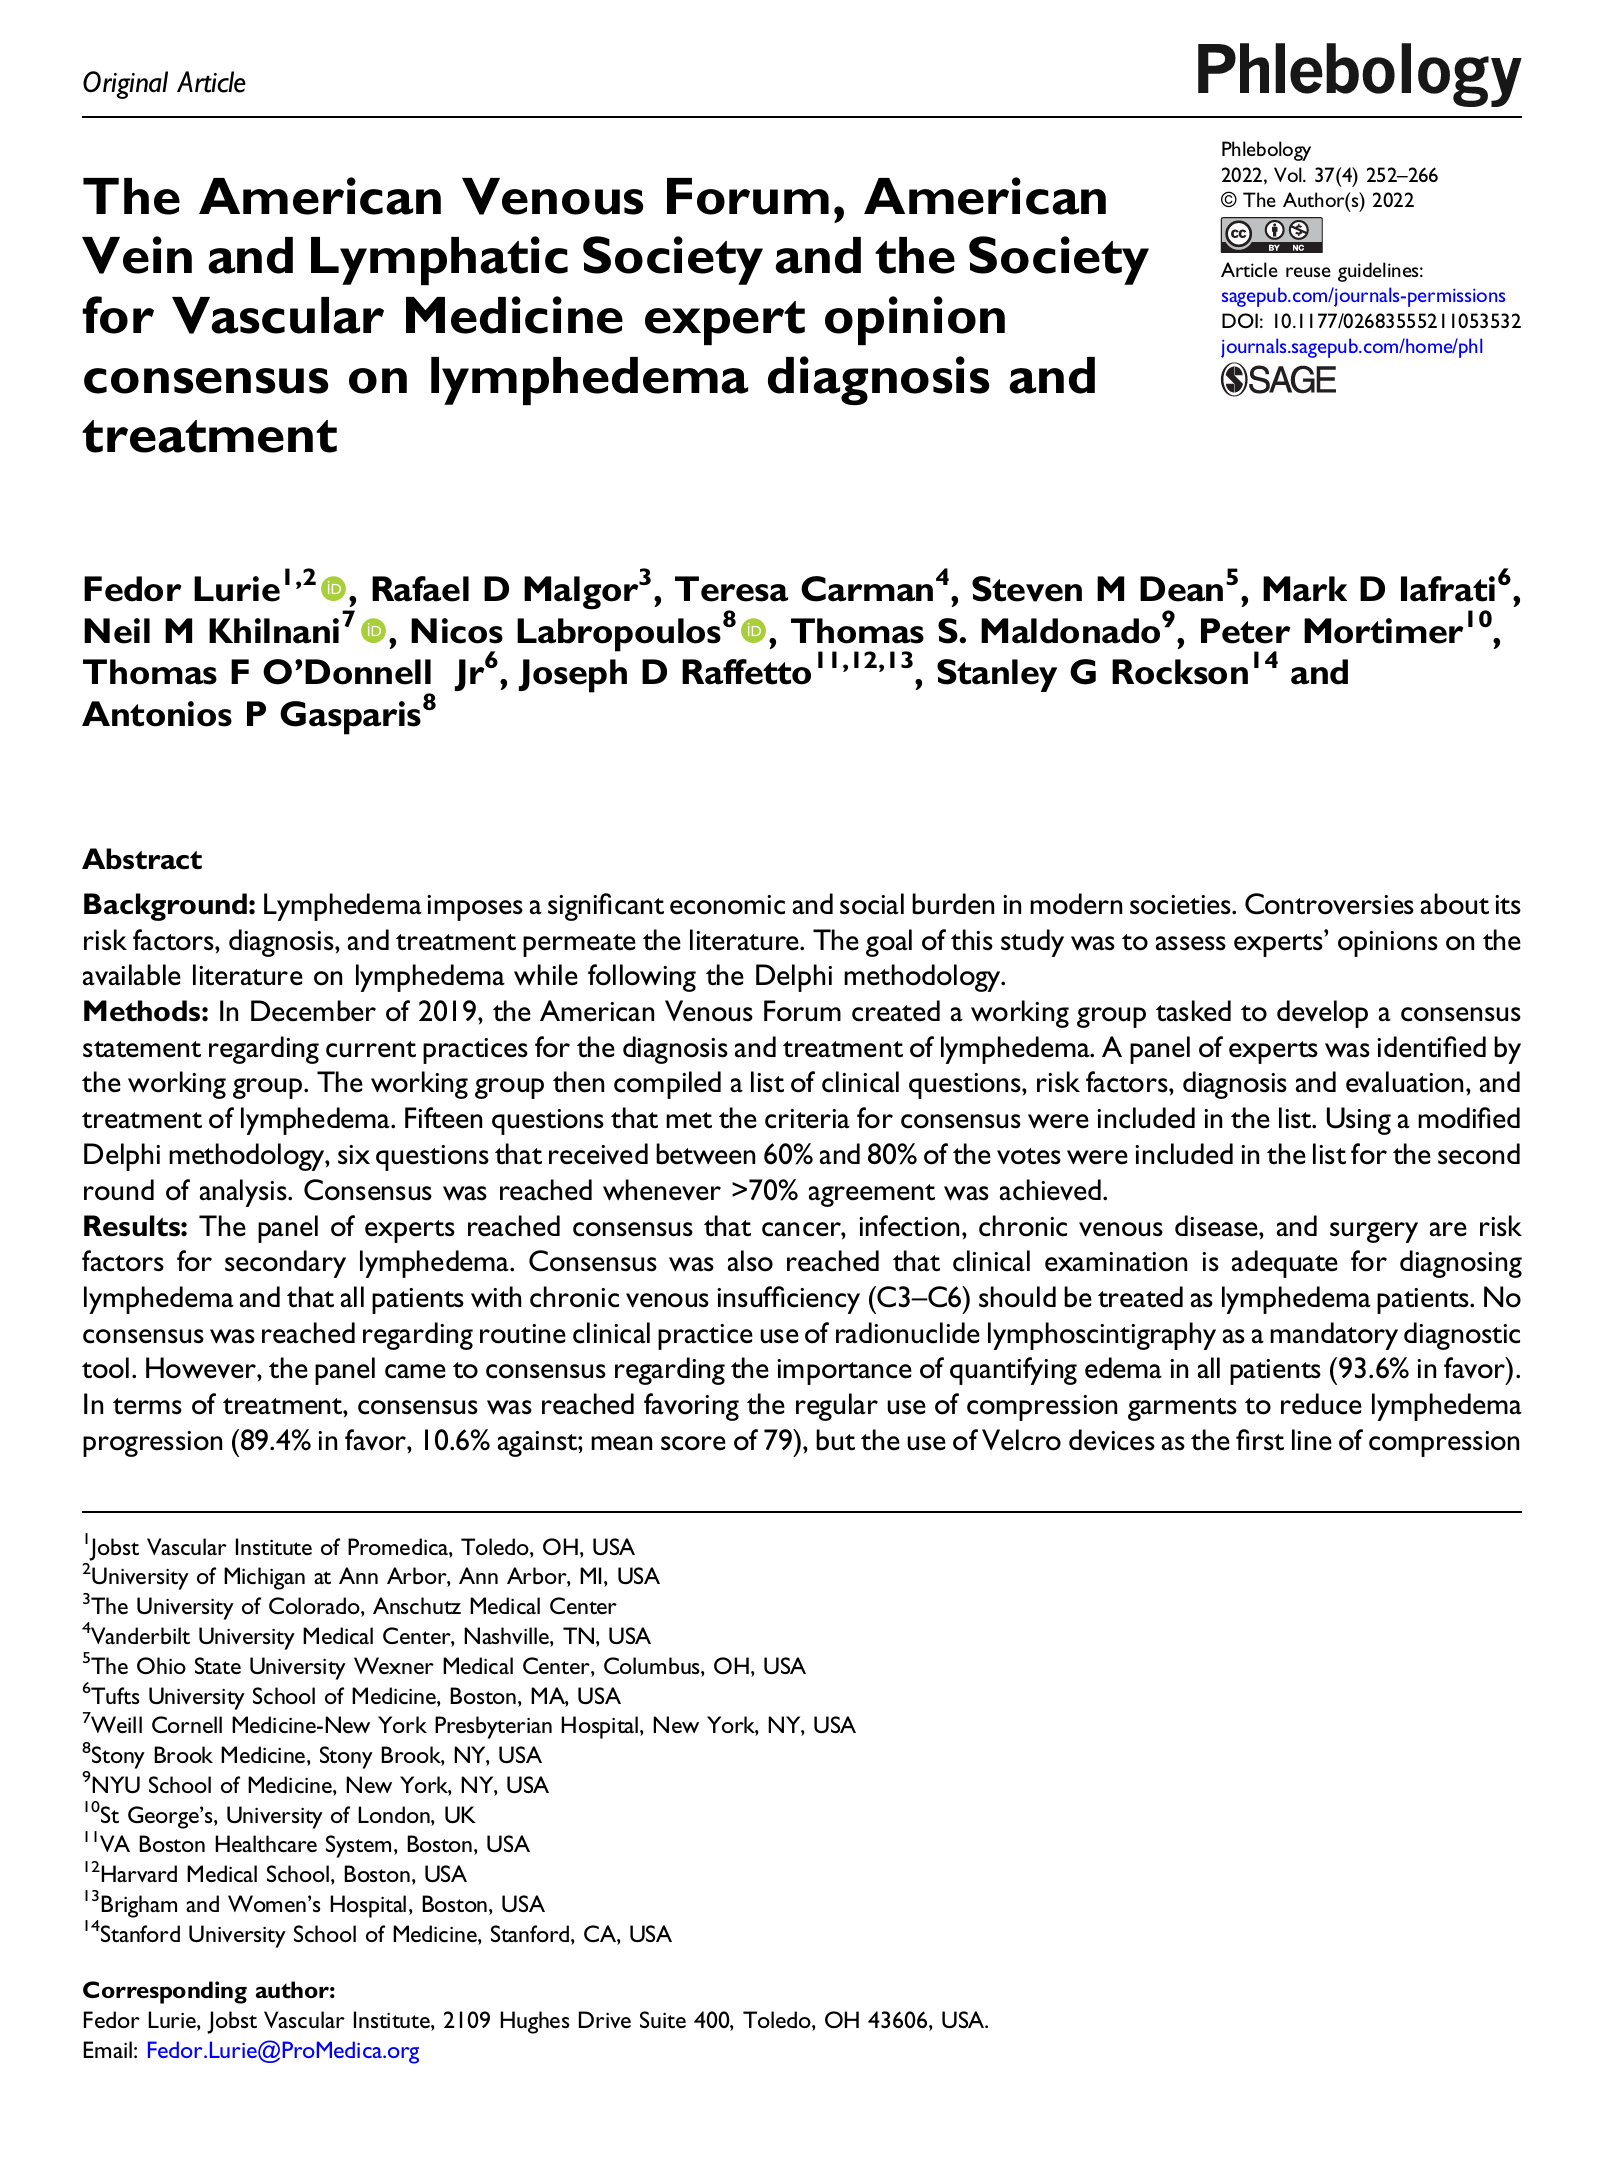 image of the article: The Journal of Venous Disease Expert Opinion Consensus on Lymphedema Diagnosis and Treatment